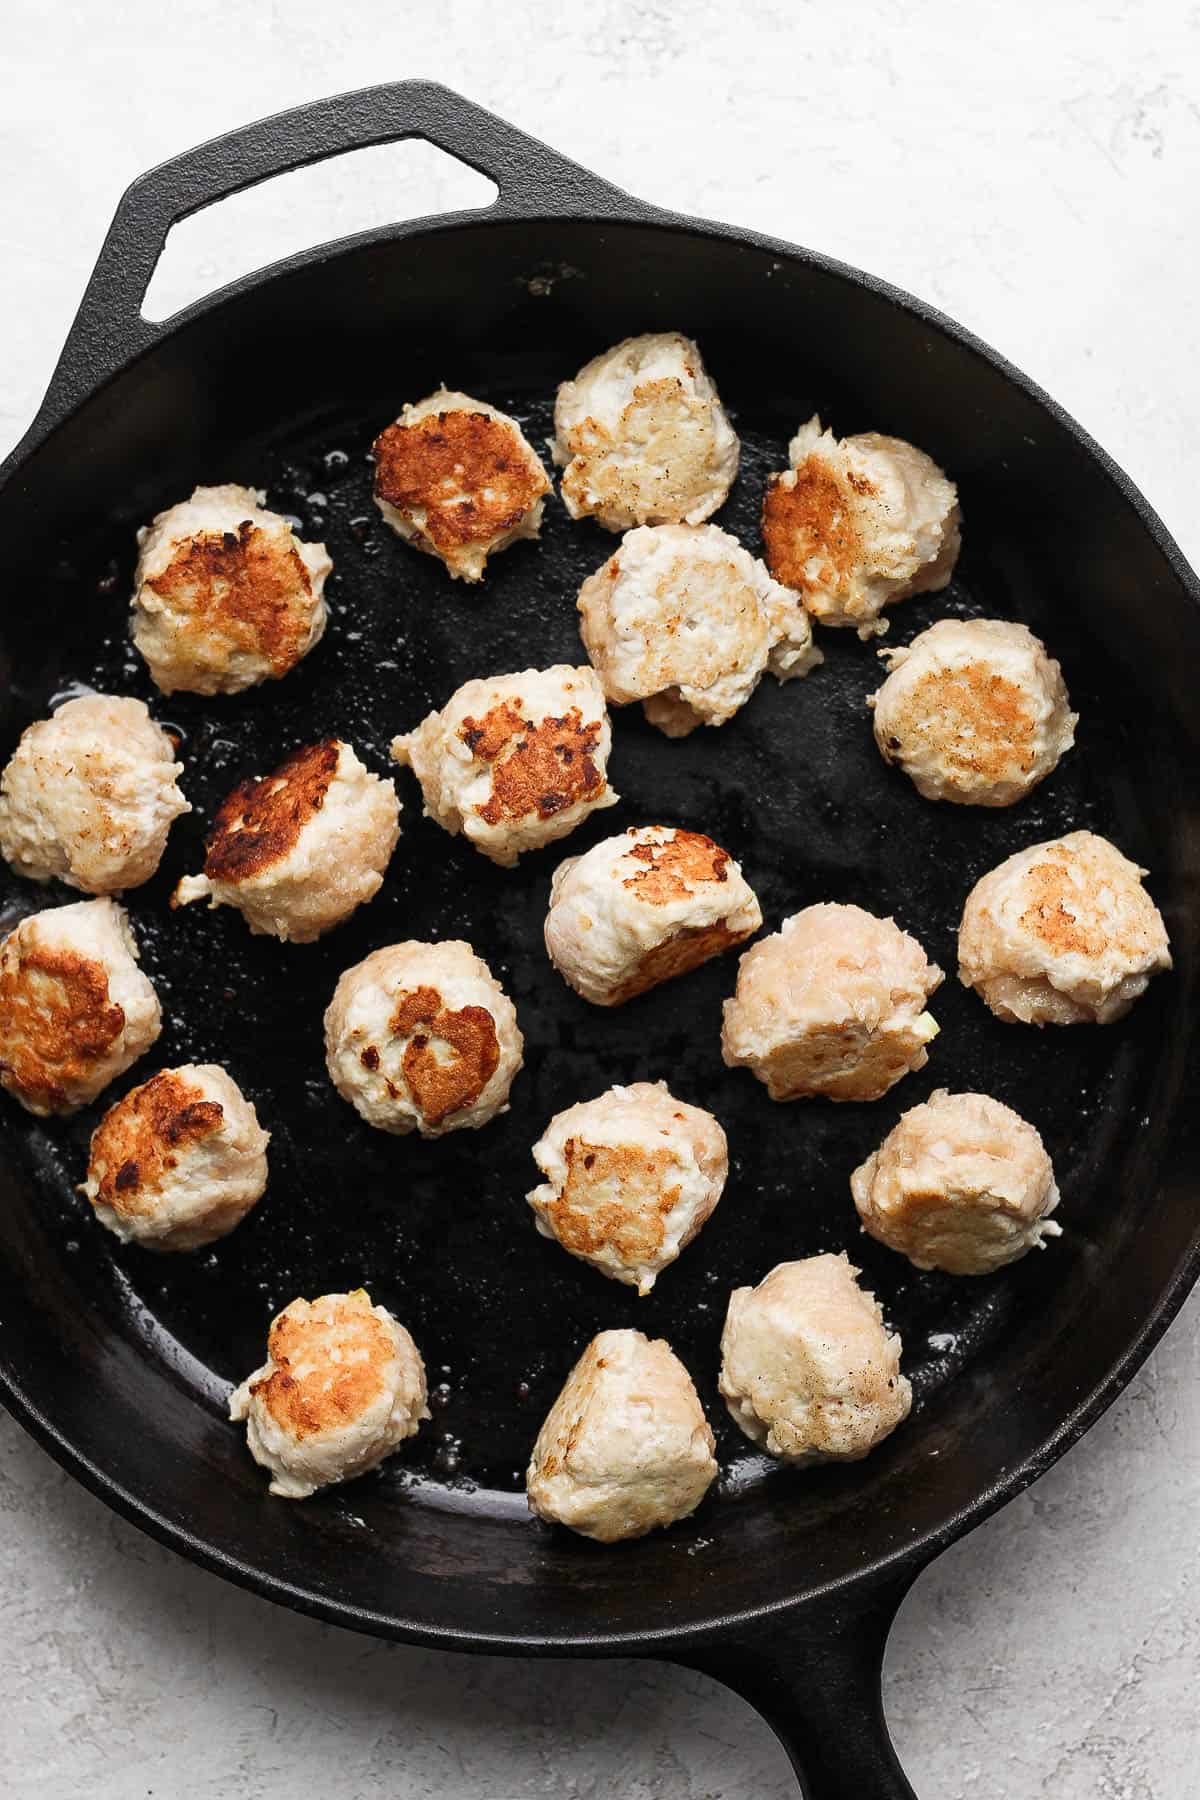 Chicken meatballs searing in a cast iron skillet.